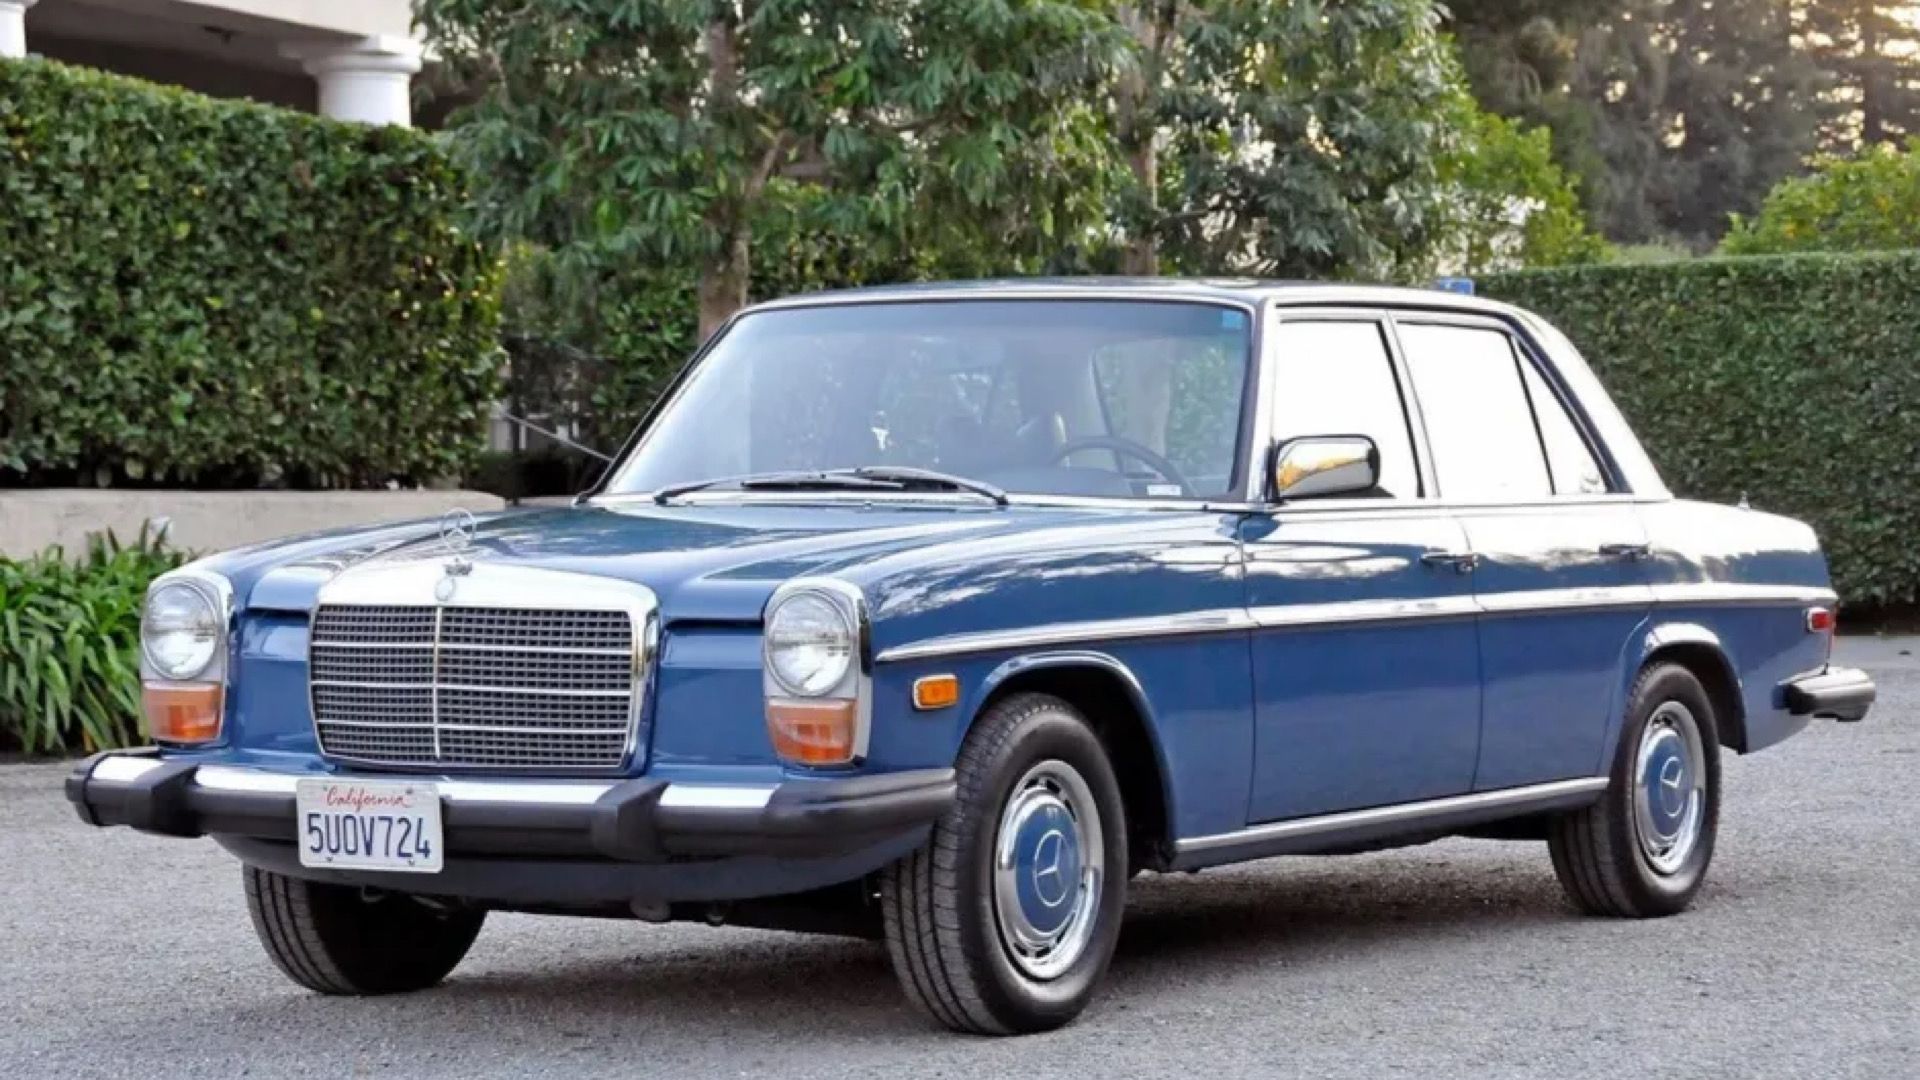 1976 Mercedes-Benz 240D in blue Posing on driveway